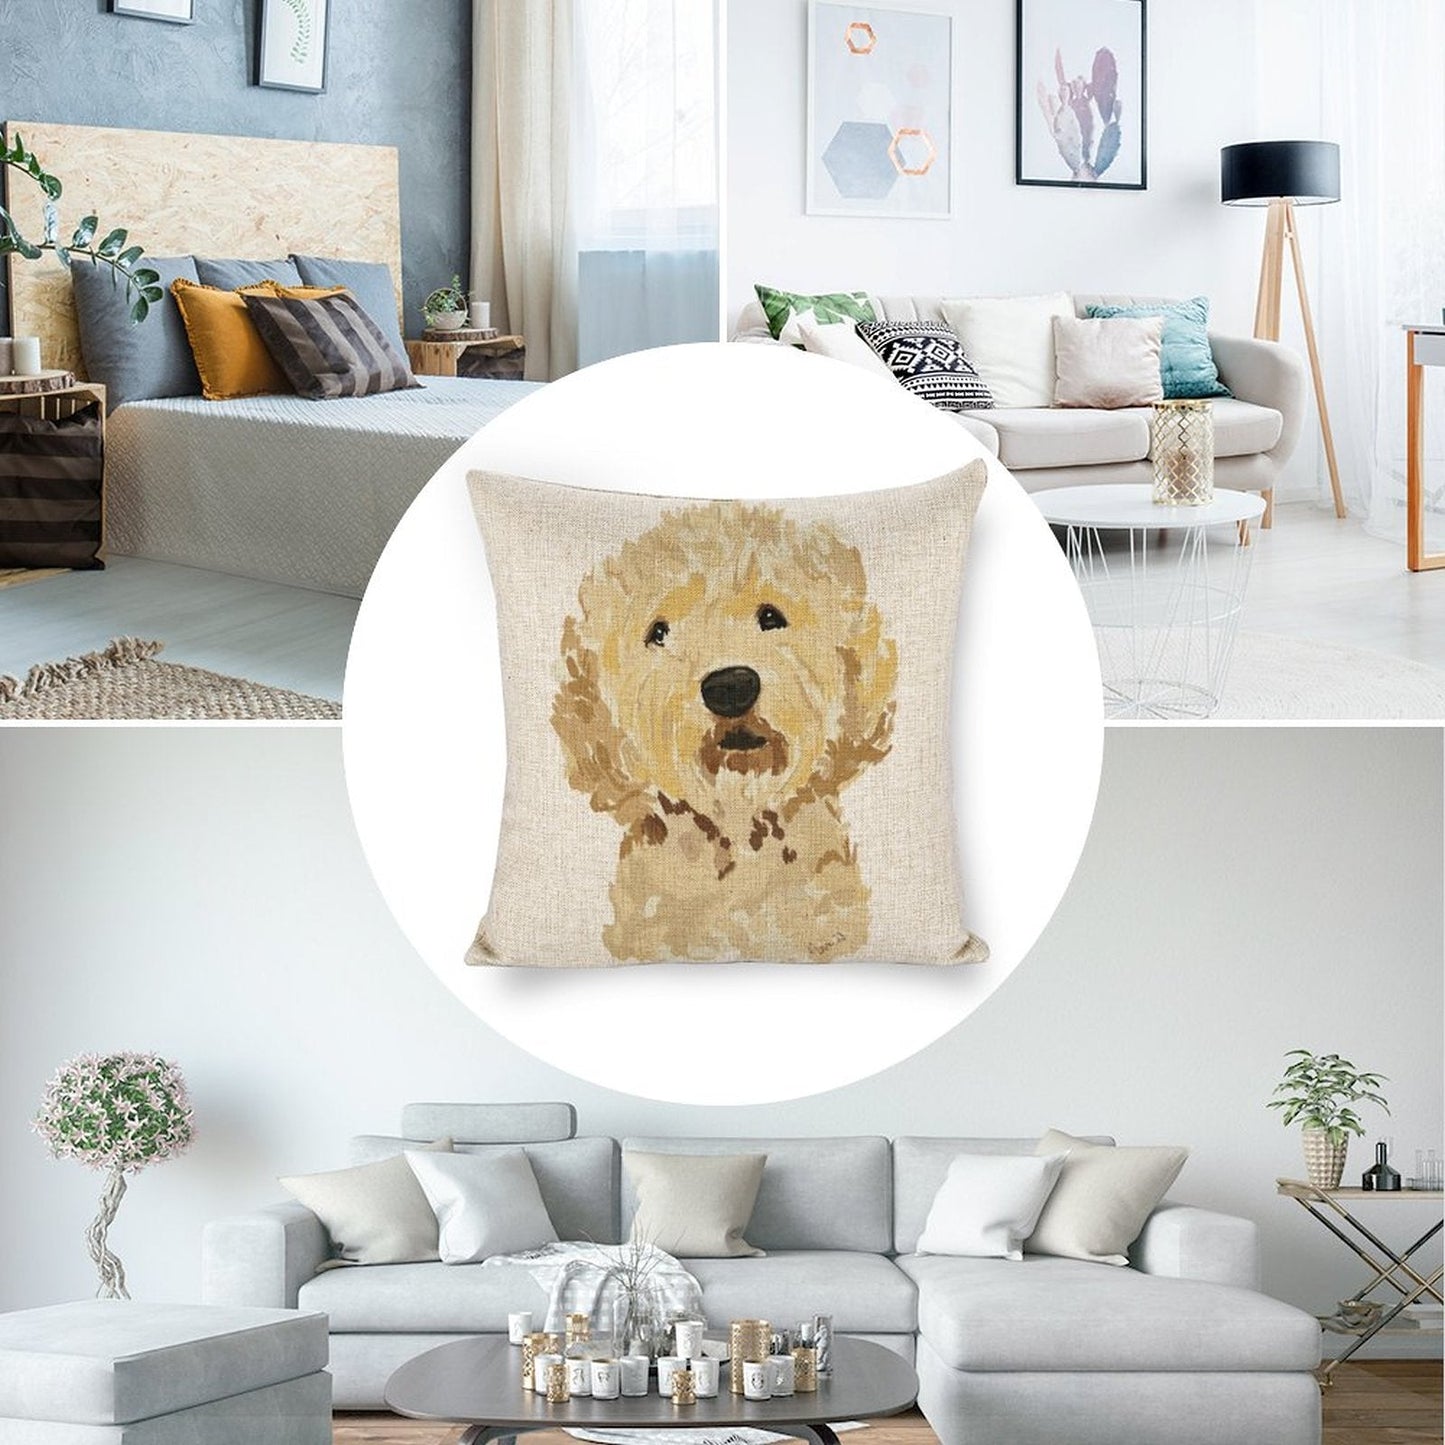 GoldenDoodle Personalized Photo Pillowcases (Pillow Excluded) - Blue Cava